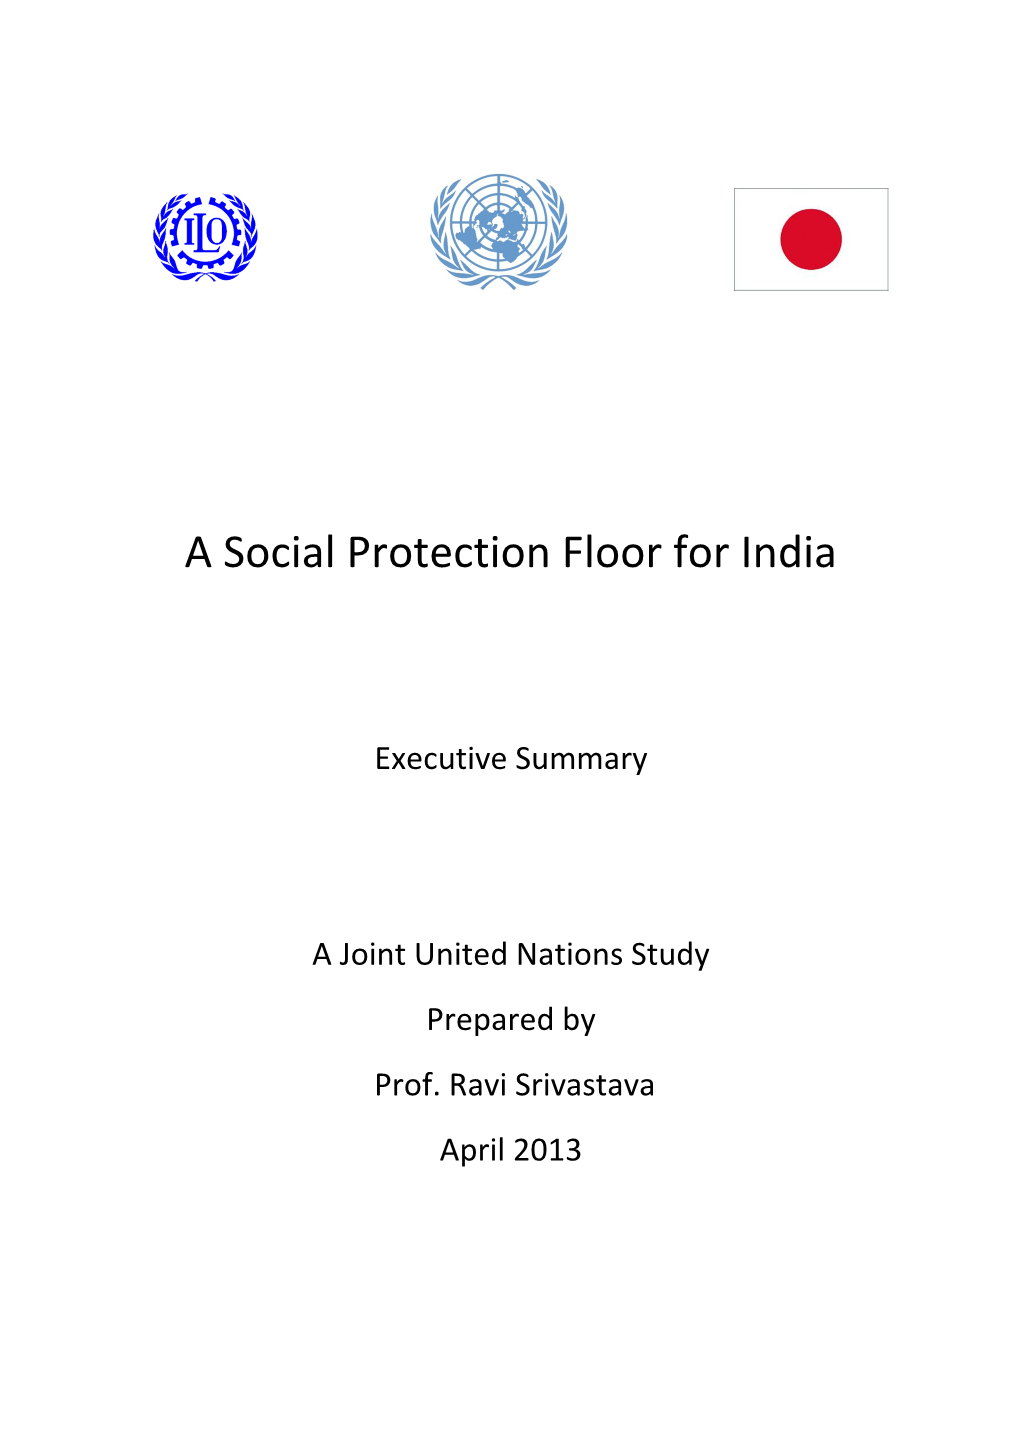 A Social Protection Floor for India